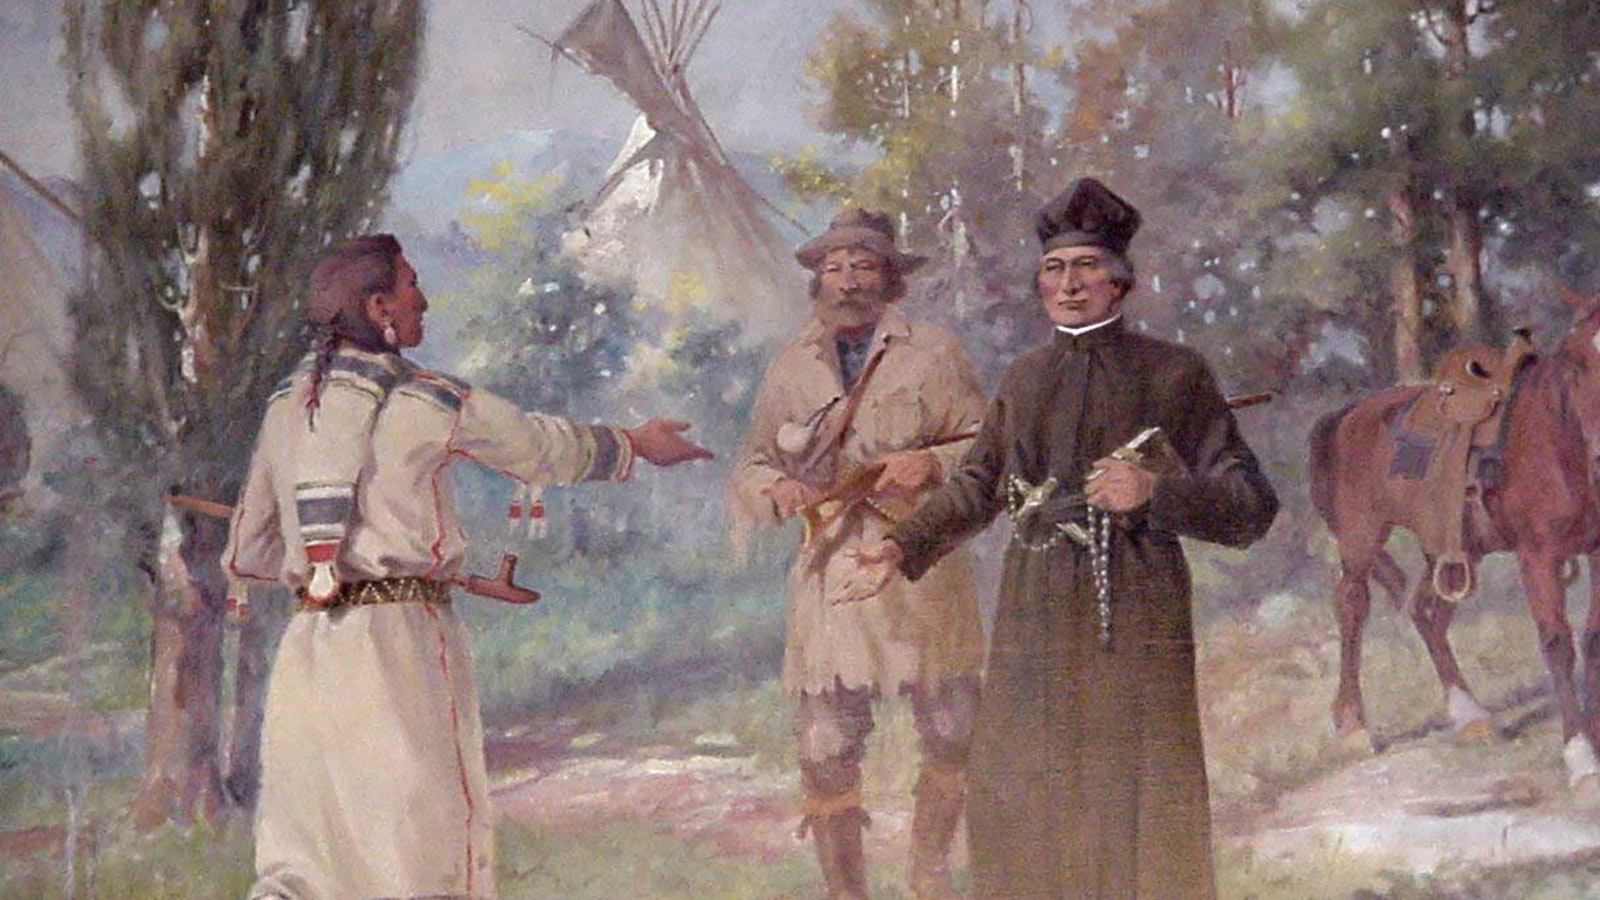 This painting depicts Fr. Pierr-Jean De Smet, who traveled extensively throughout the early West spreading the gospel and establishing Catholic missions.